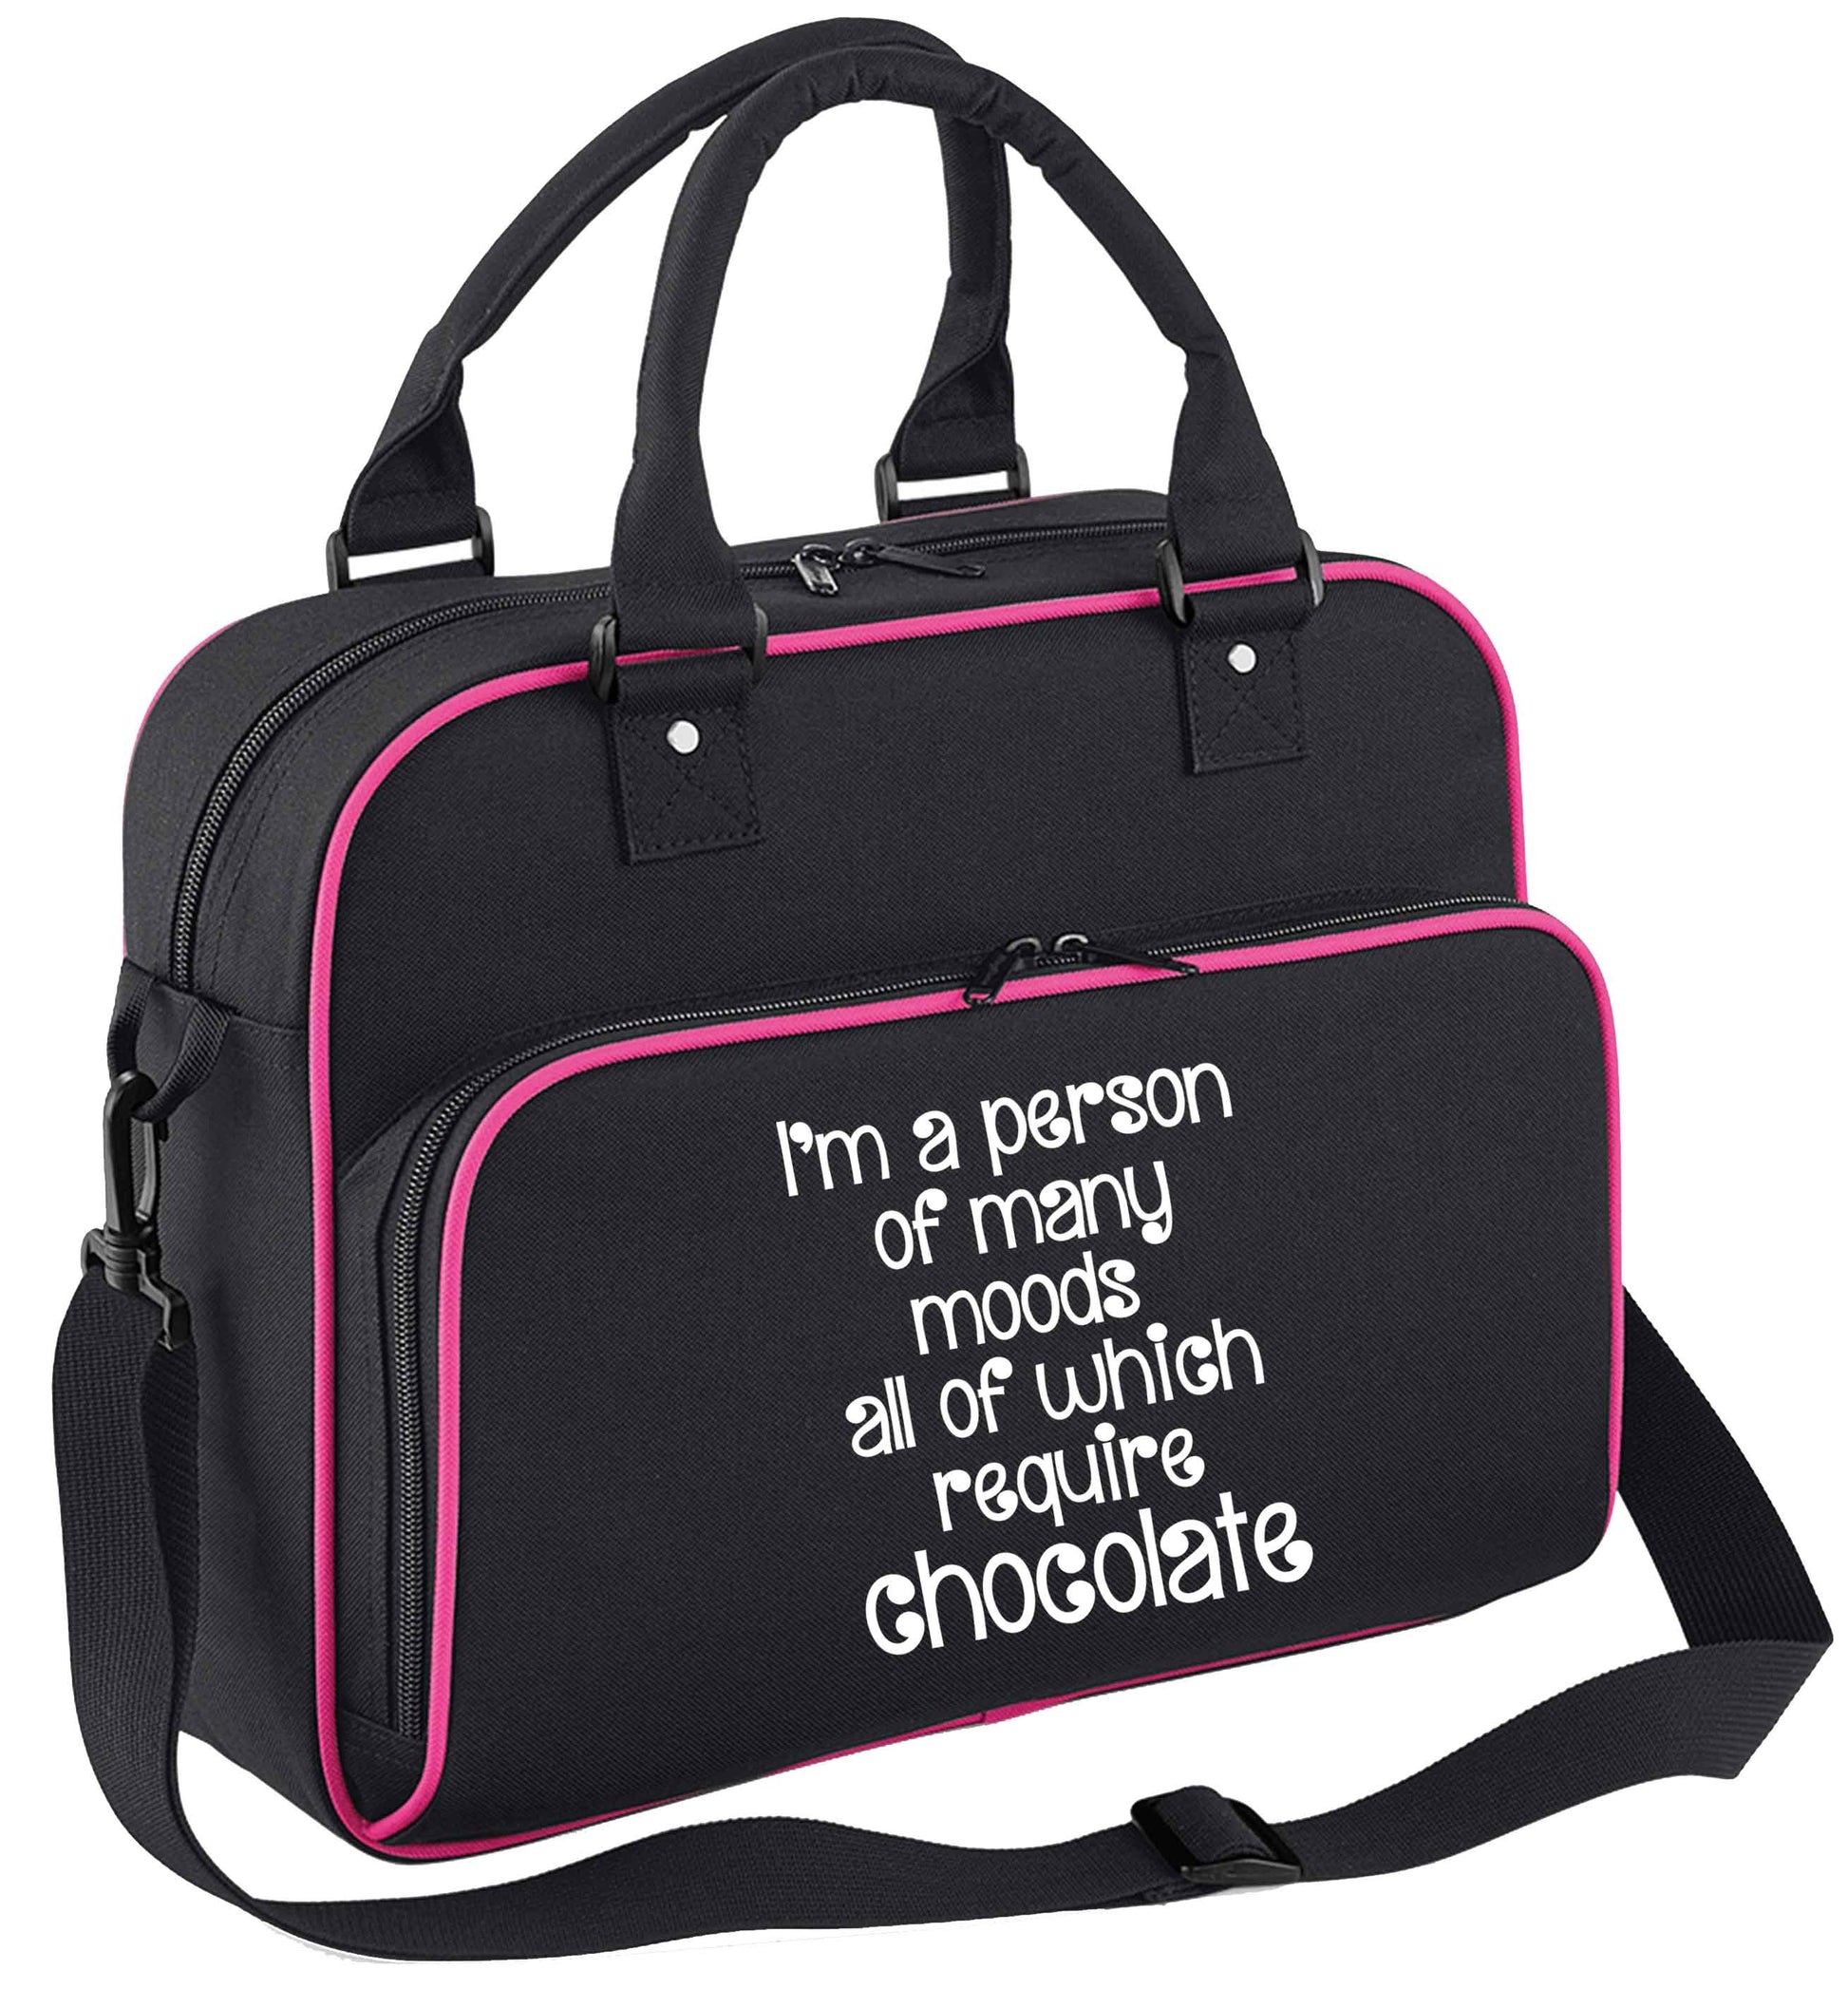 funny gift for a chocaholic! I'm a person of many moods all of which require chocolate children's dance bag black with pink detail